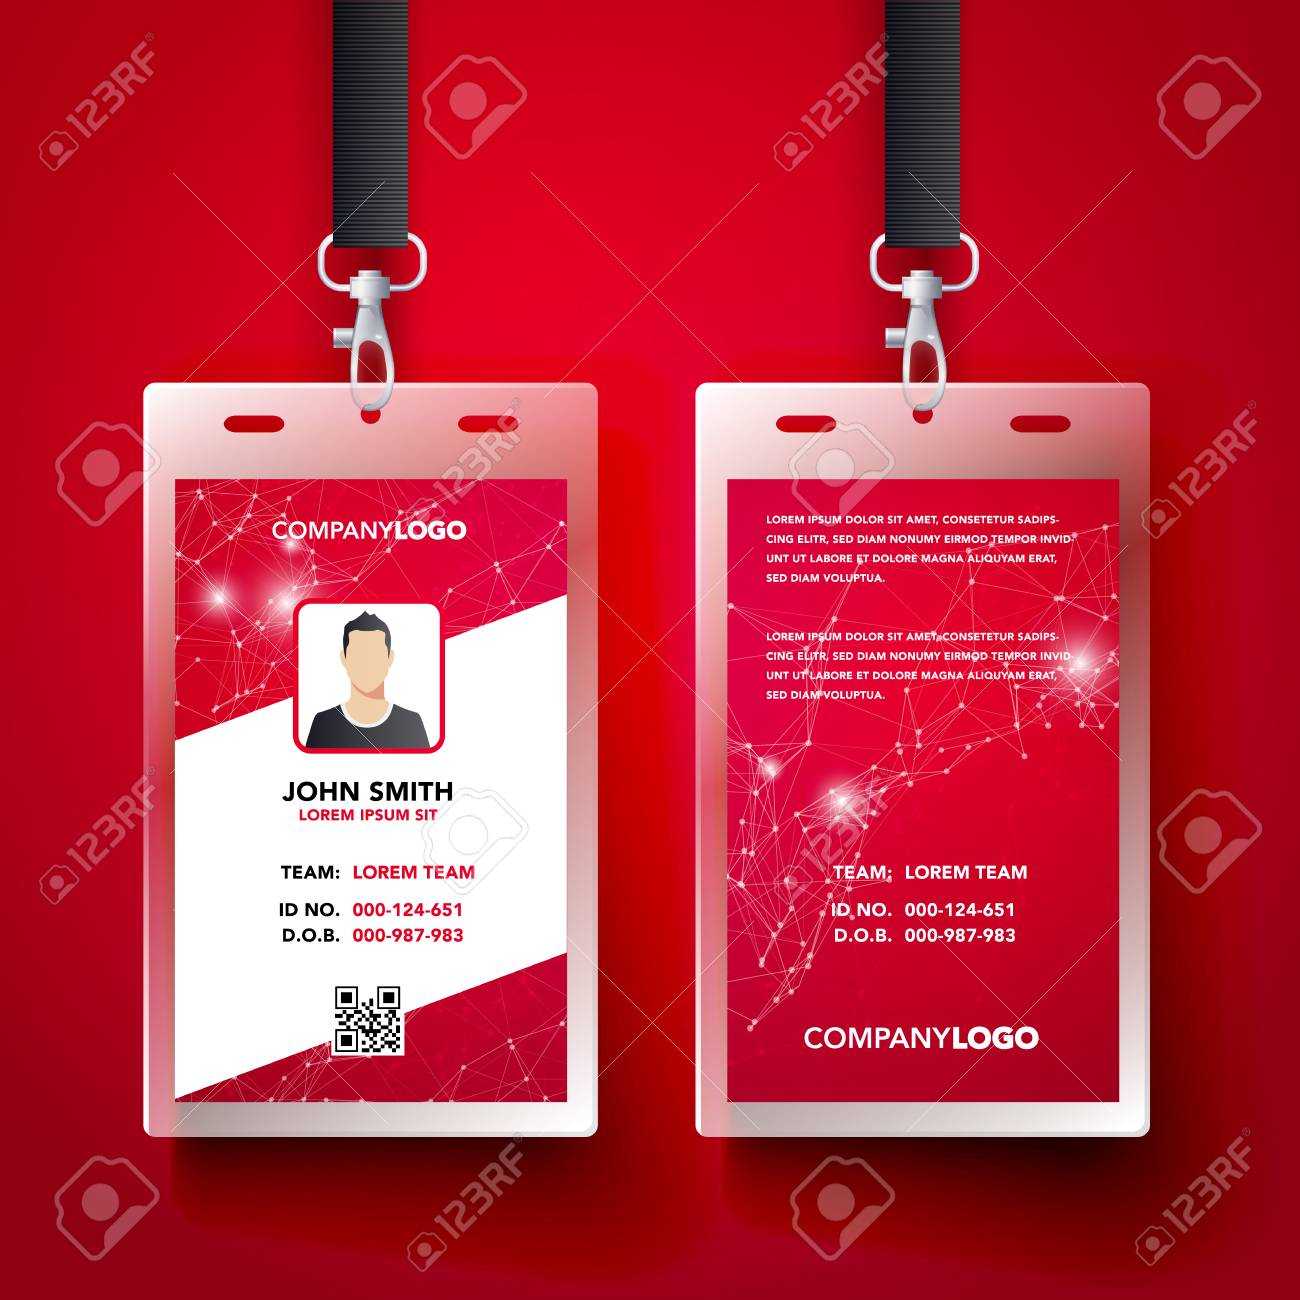 Vector Illustration Red Corporate Id Card Design Template Set With Company Id Card Design Template